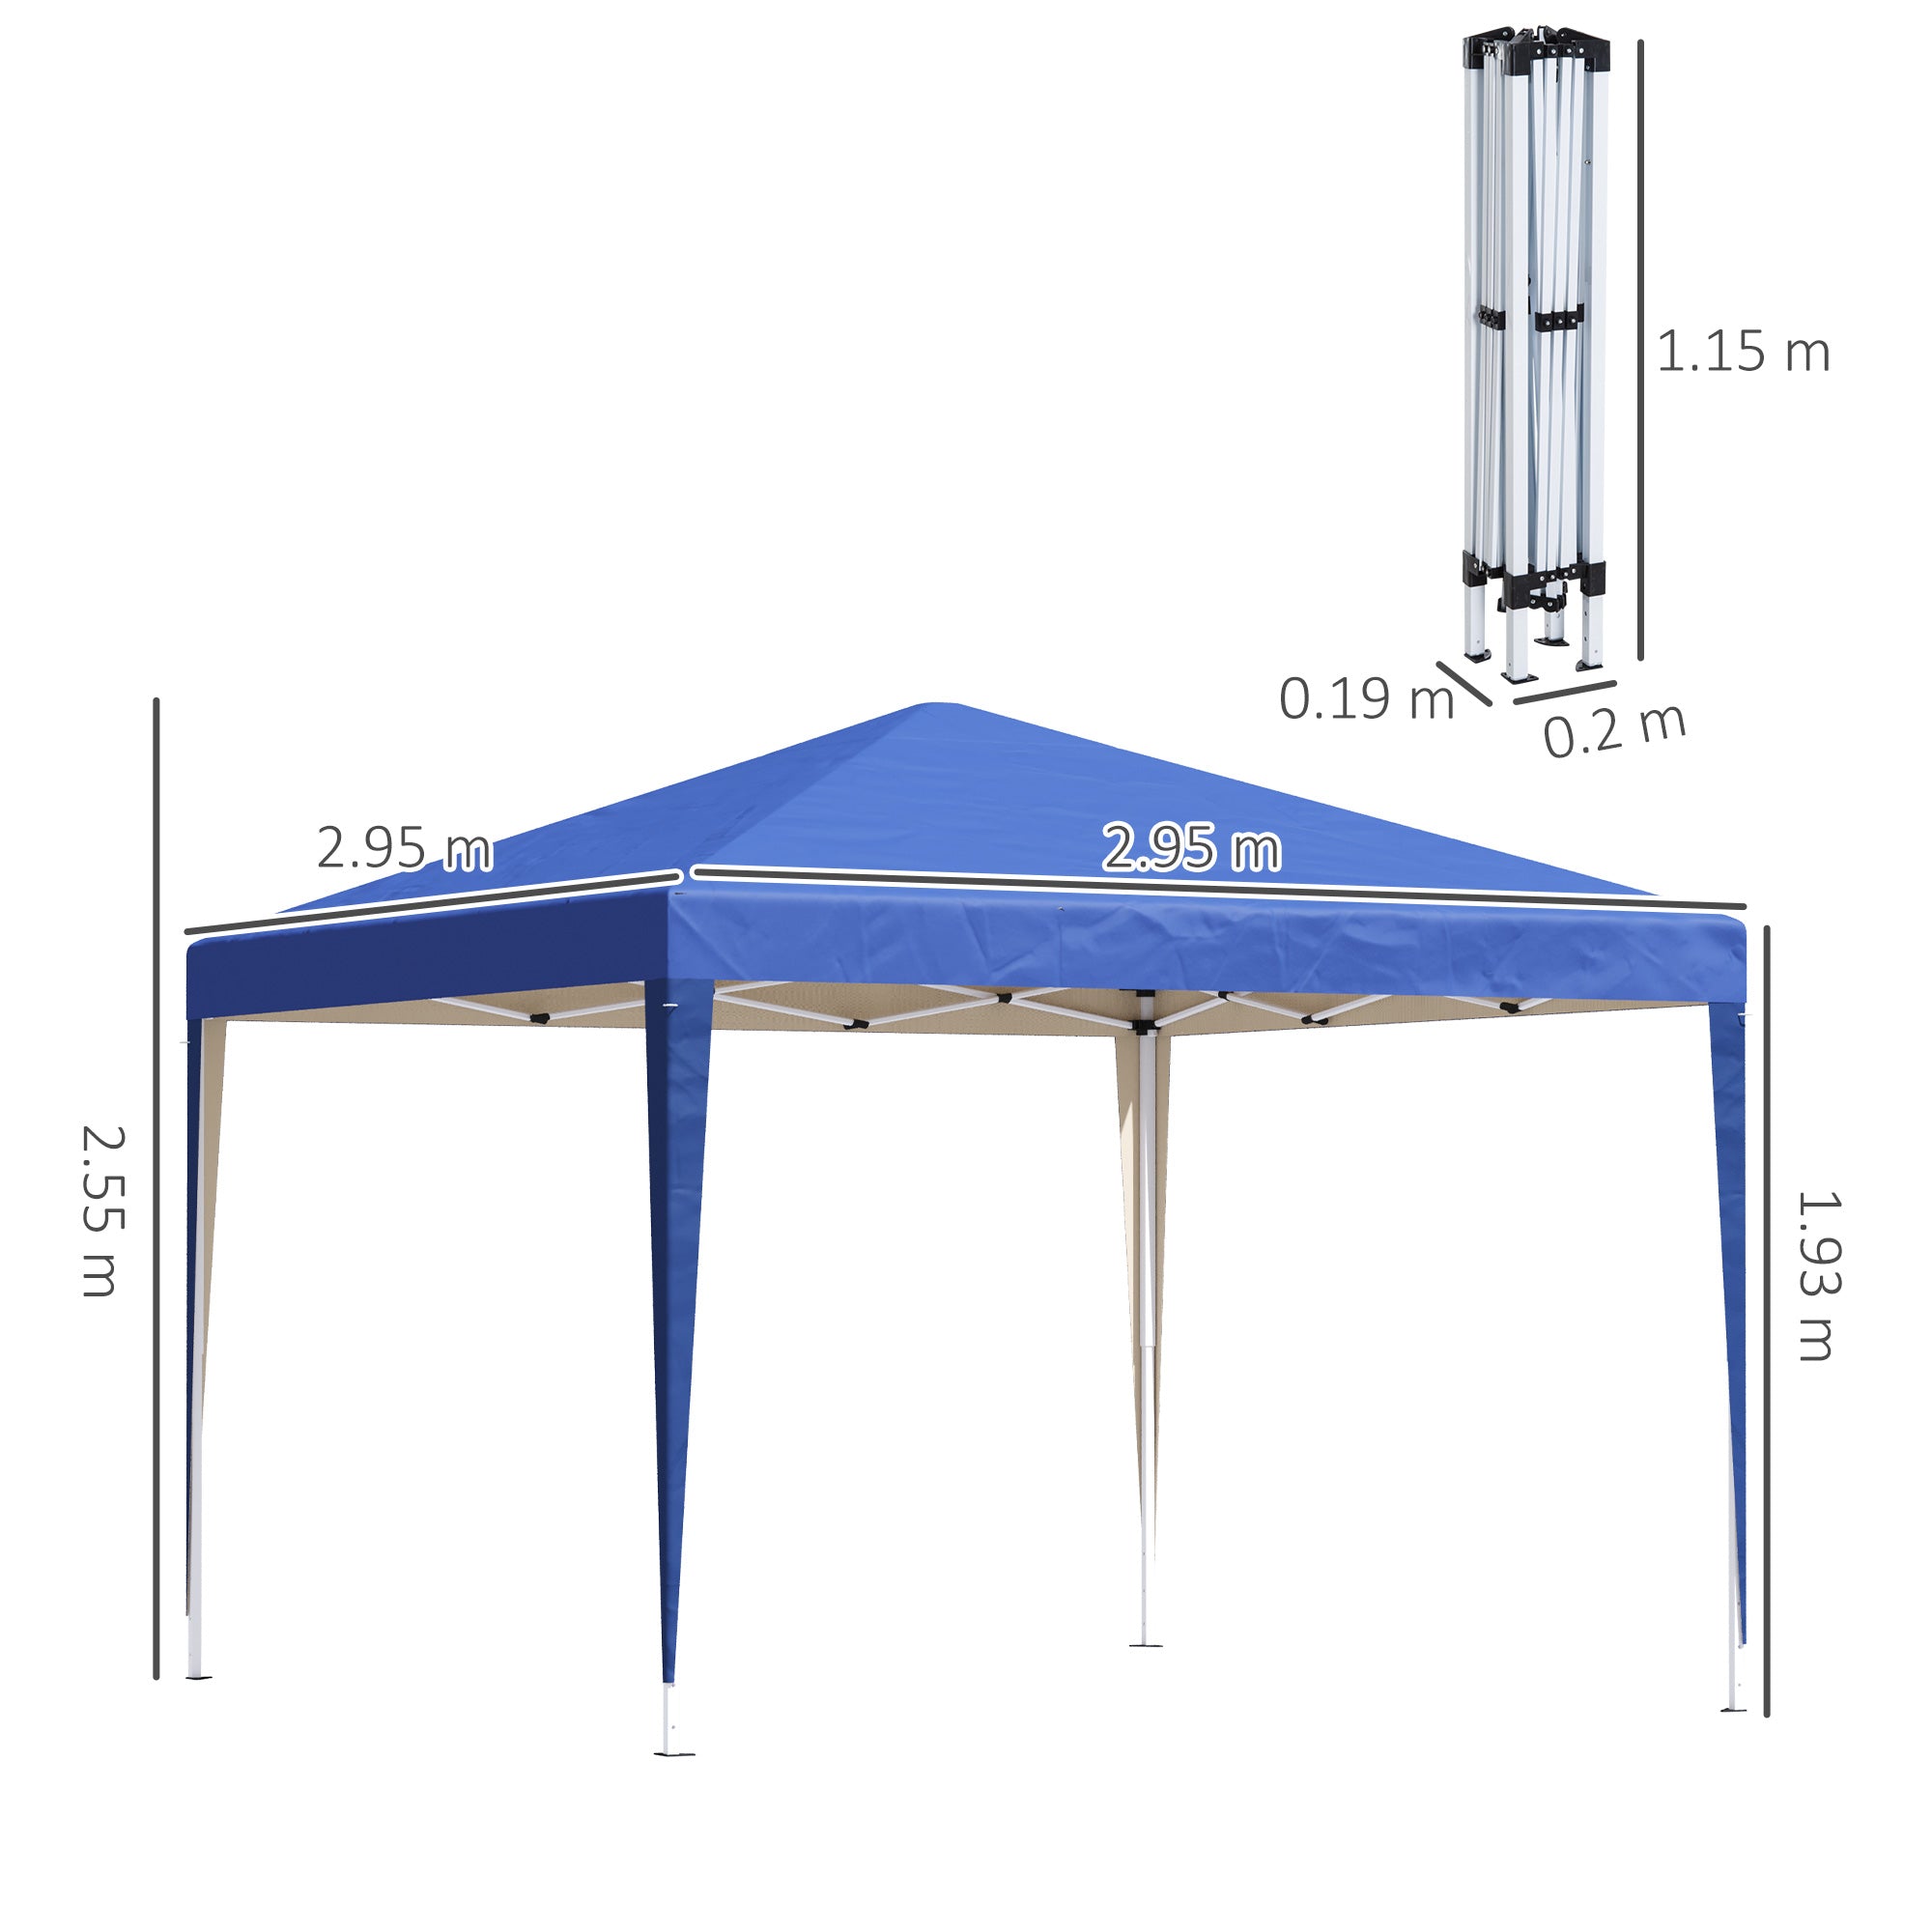 Outsunny 3 x 3M Garden Pop Up Gazebo Marquee Party Tent Wedding Canopy (Blue) + Carrying Bag - Inspirely